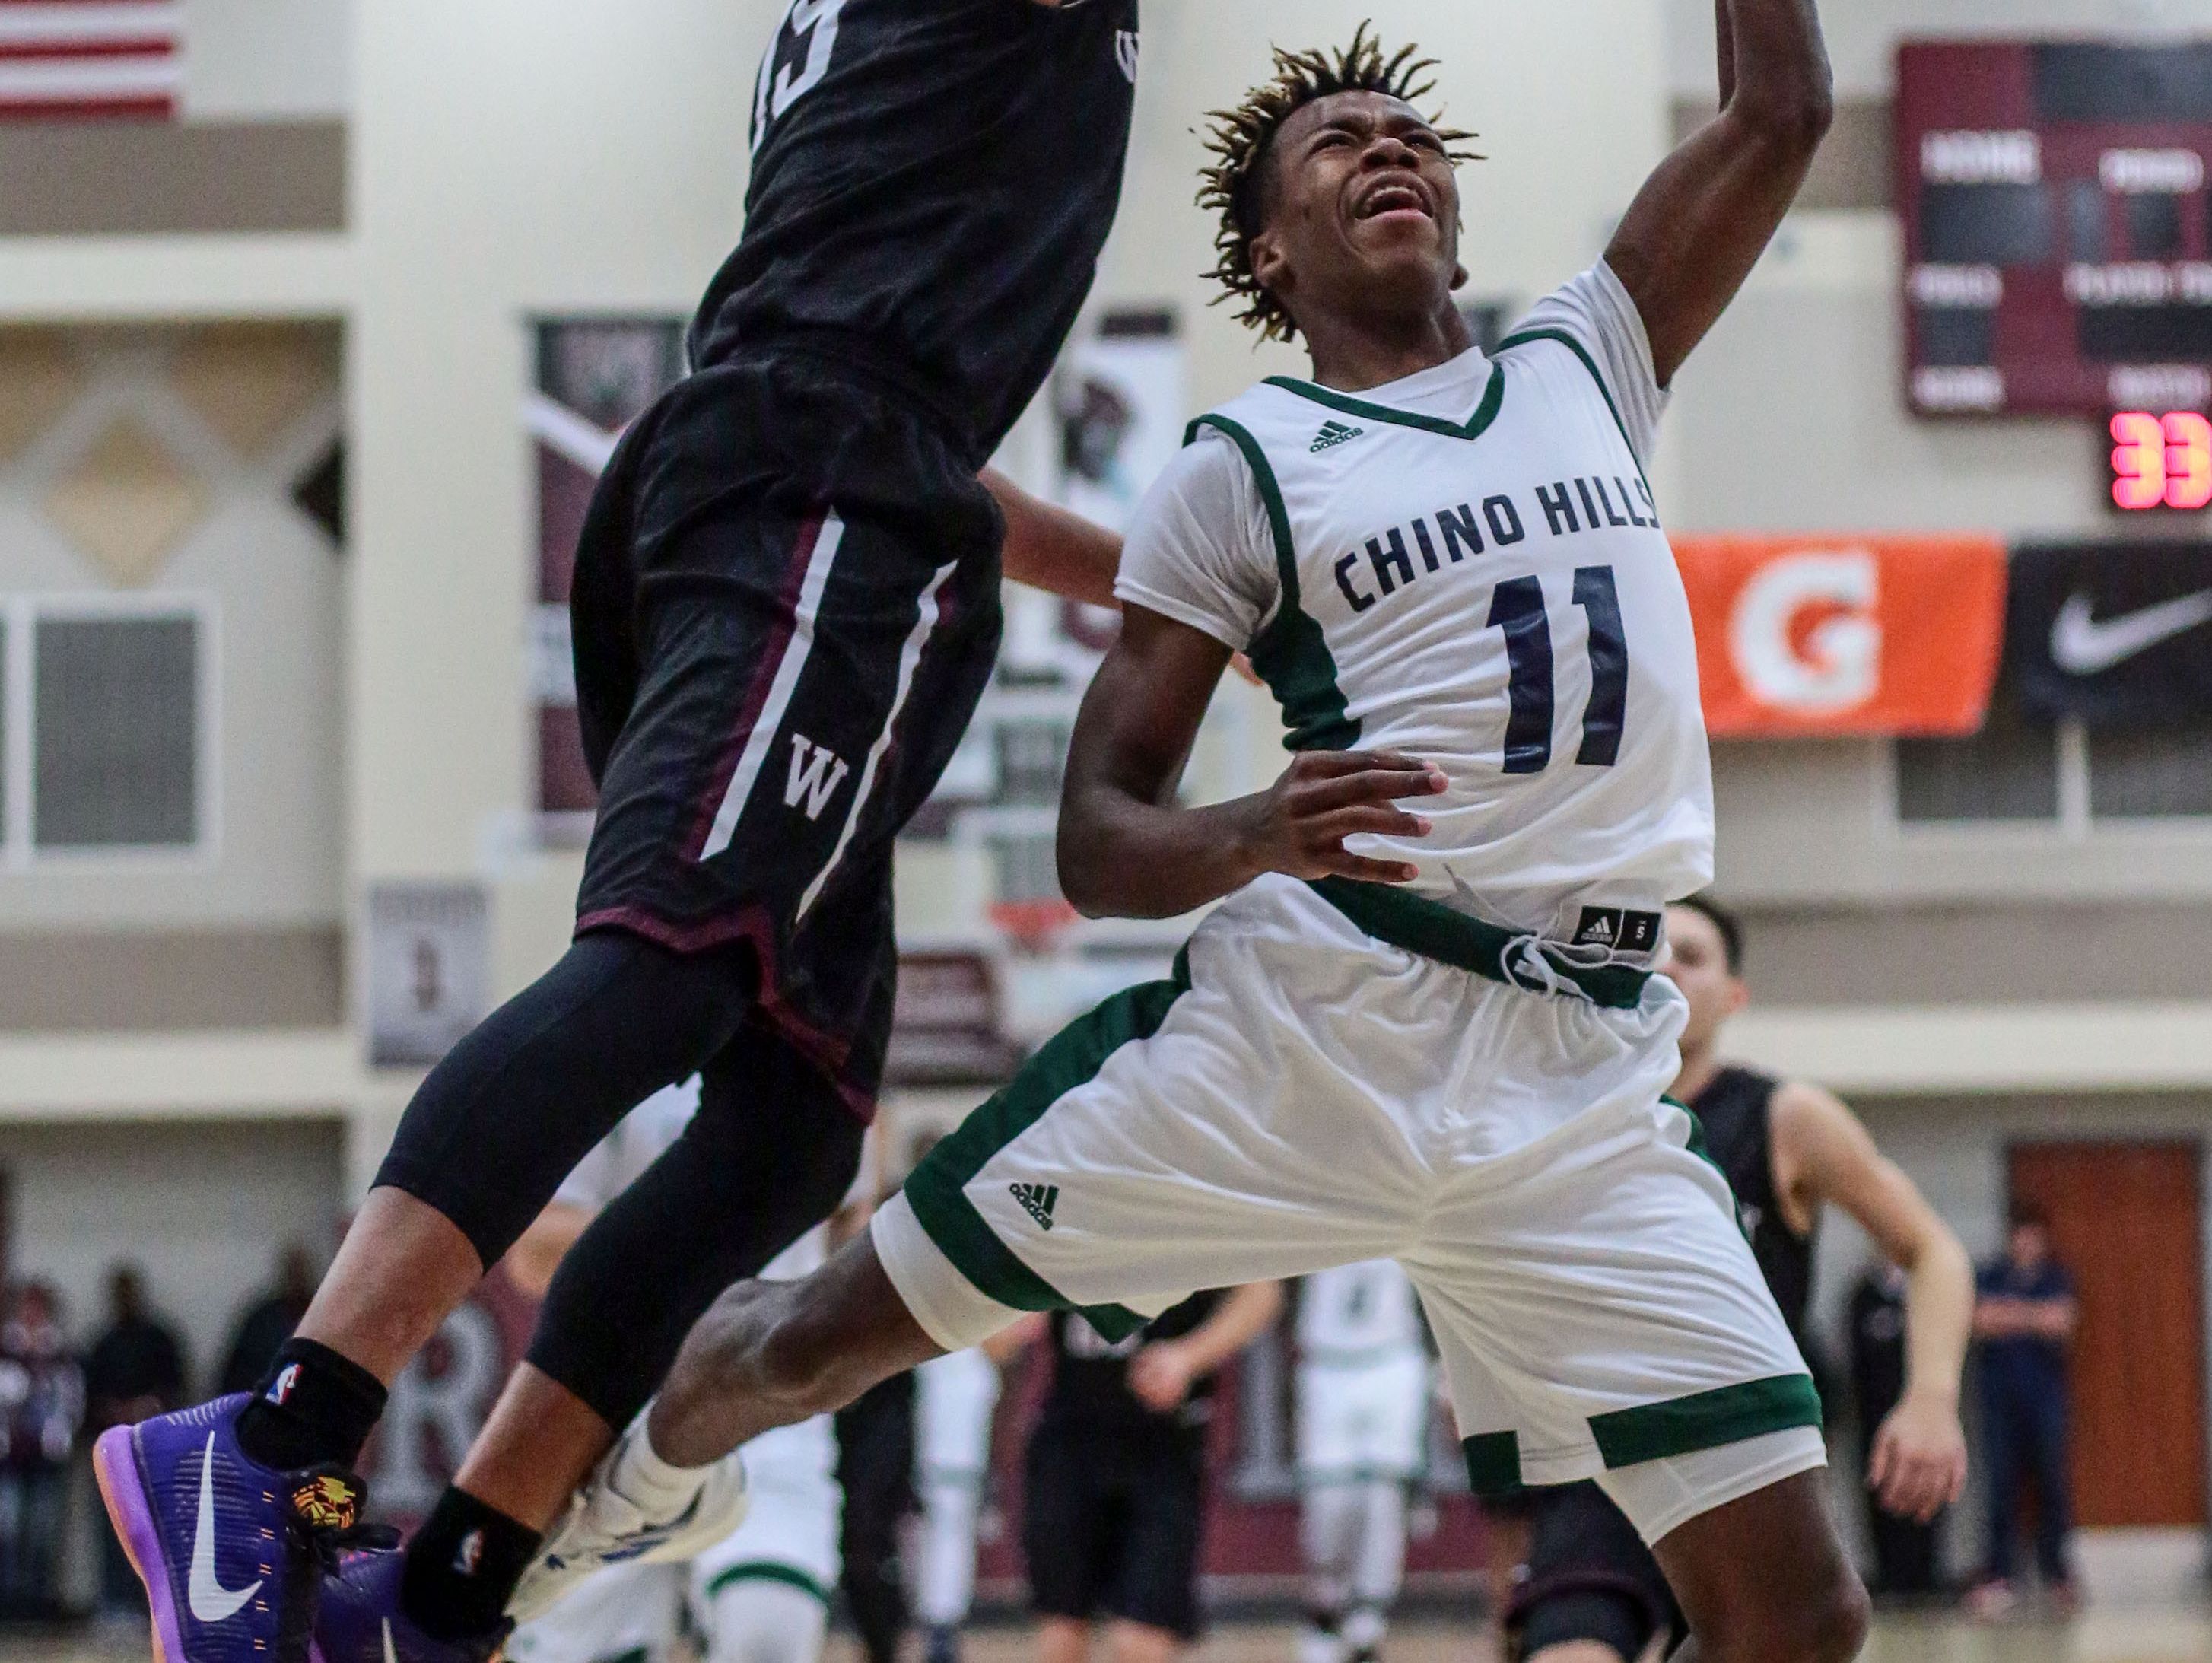 Chino Hills' Phaquan Davis is blocked by Woodcreek's Jackson Hughes as he tries to shoot on Wednesday, December 28, 2016 during the Rancho Mirage Holiday Invitational at Rancho Mirage High School.